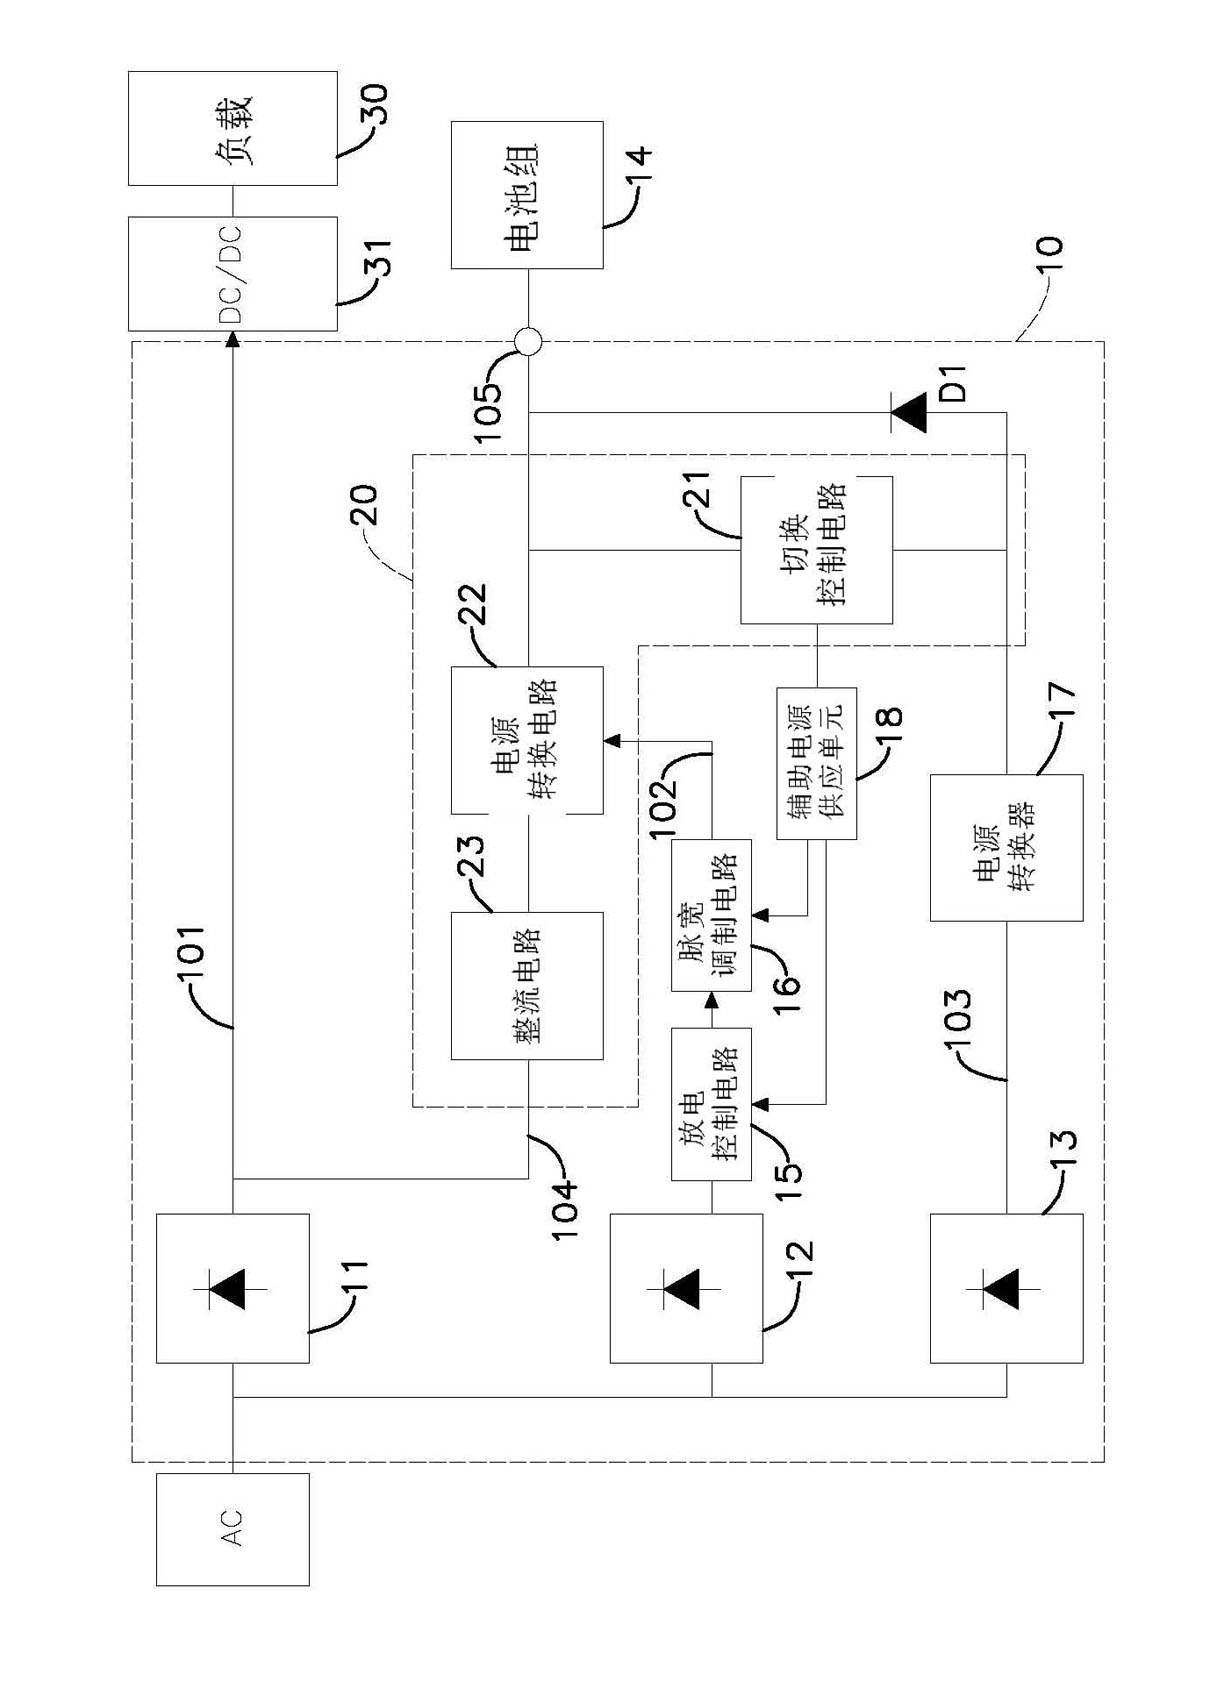 Direct-current output uninterrupted power supply